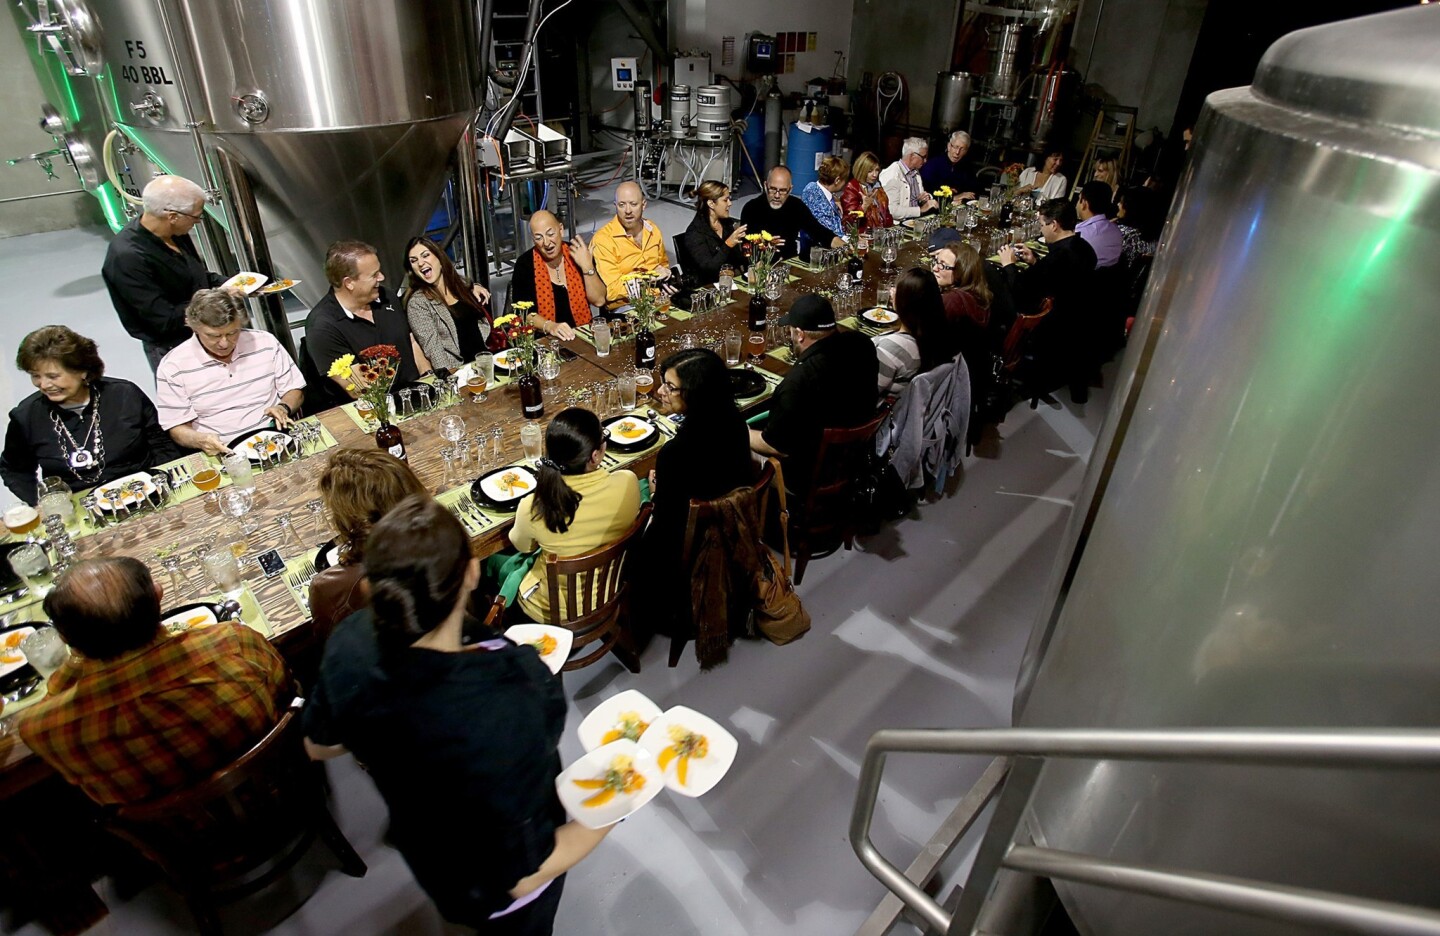 One of a growing number of secret supper clubs, PS Underground sends curious diners around the Palm Springs area, offering sparse clues as to the meal that awaits. A recent outing was held at the Coachella Valley Brewing Company in Thousand Palms.